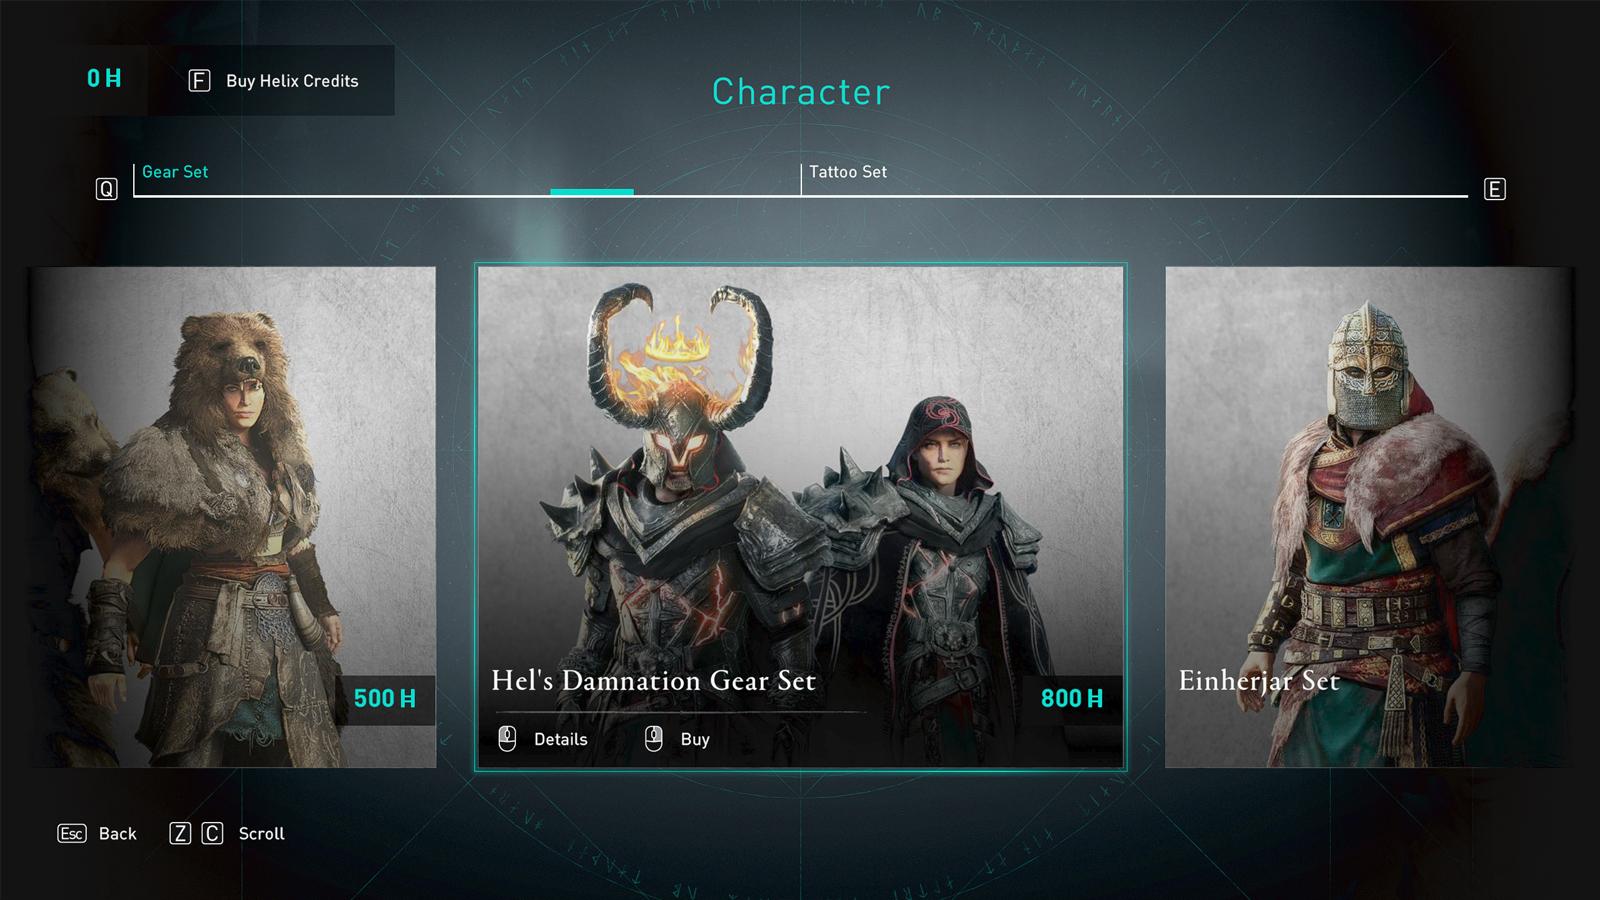 Hel's Damnation Assassin's Creed Valhalla set in store